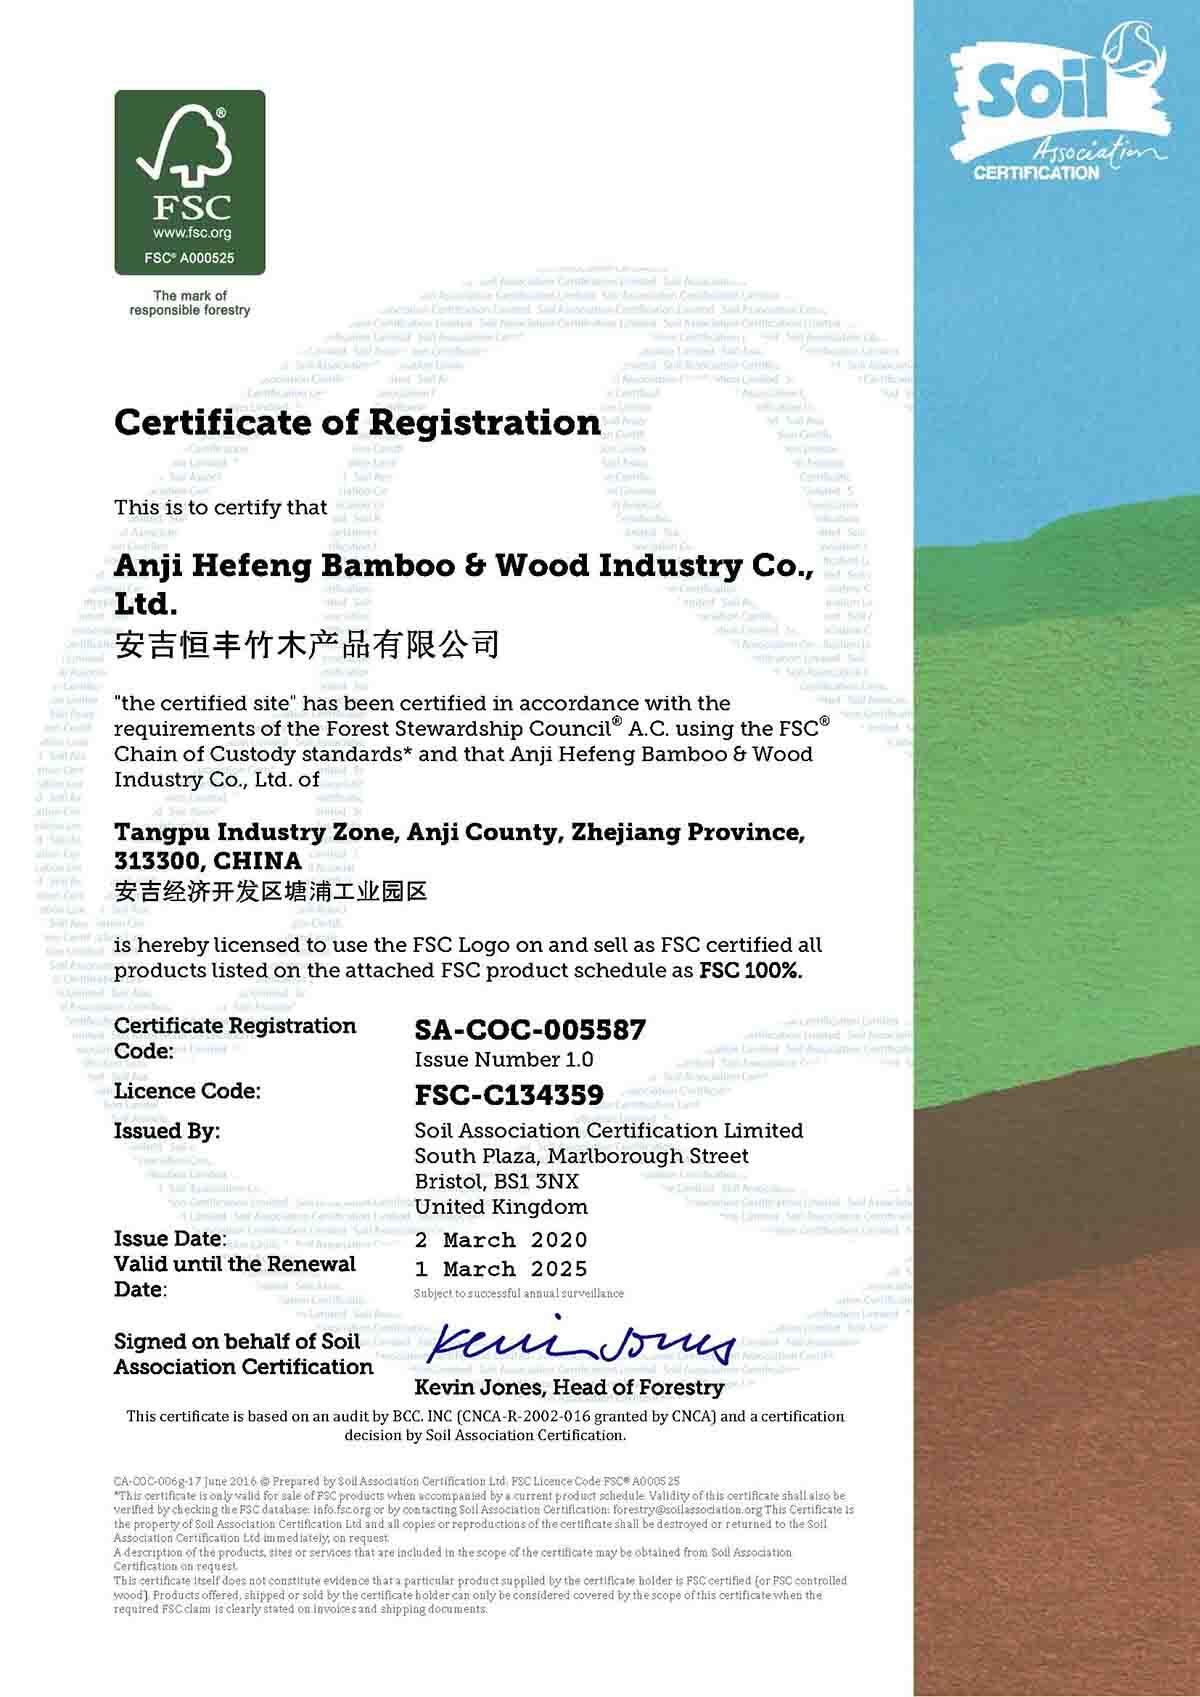 Official FSC Certificate of Registration, confirming compliance with responsible forestry standards to ensure environmental sustainability.